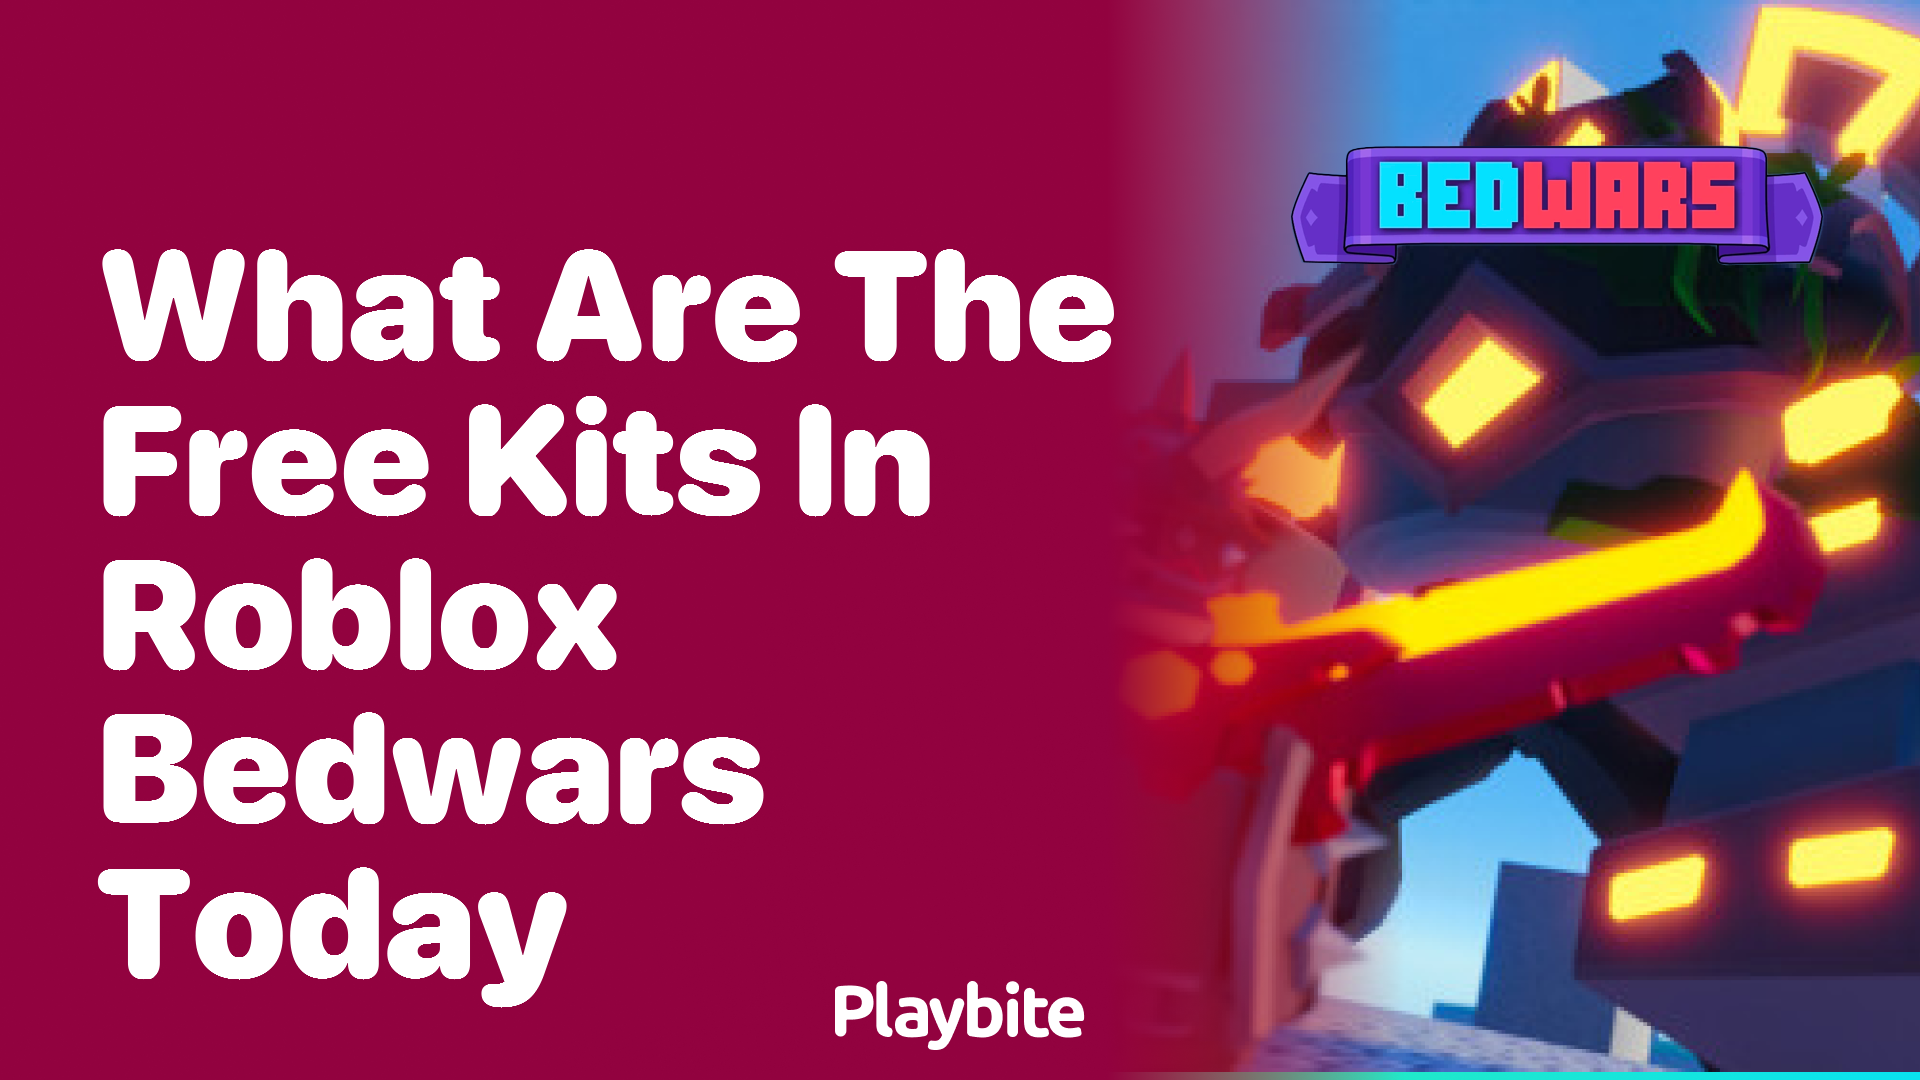 What are the Free Kits in Roblox Bedwars Today?